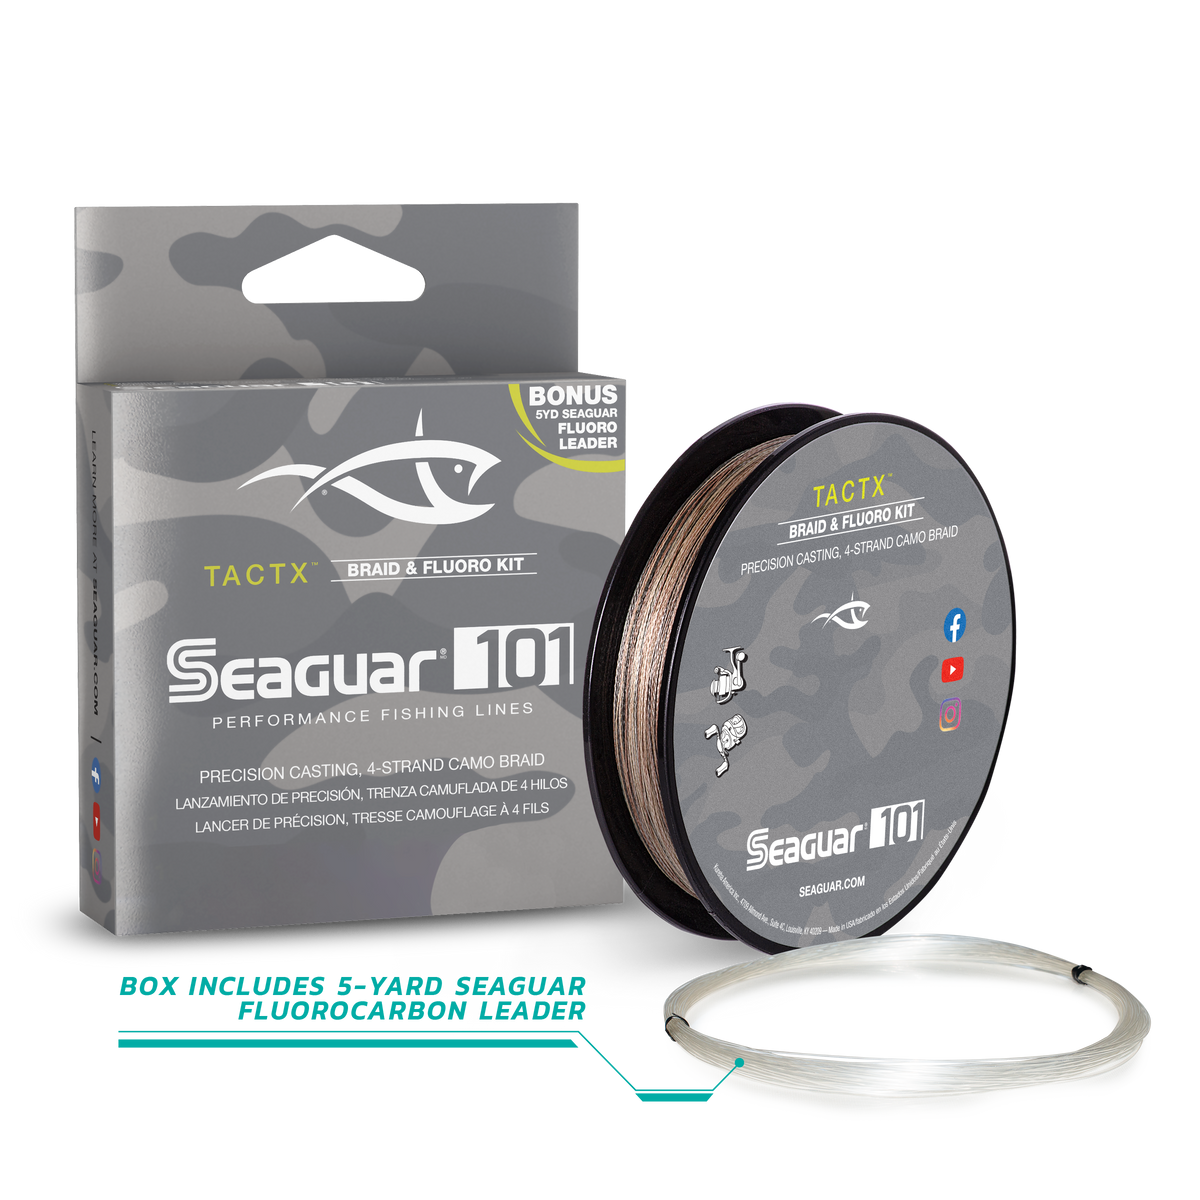 Seaguar Fluorocarbon Fishing Line in Fishing Line 